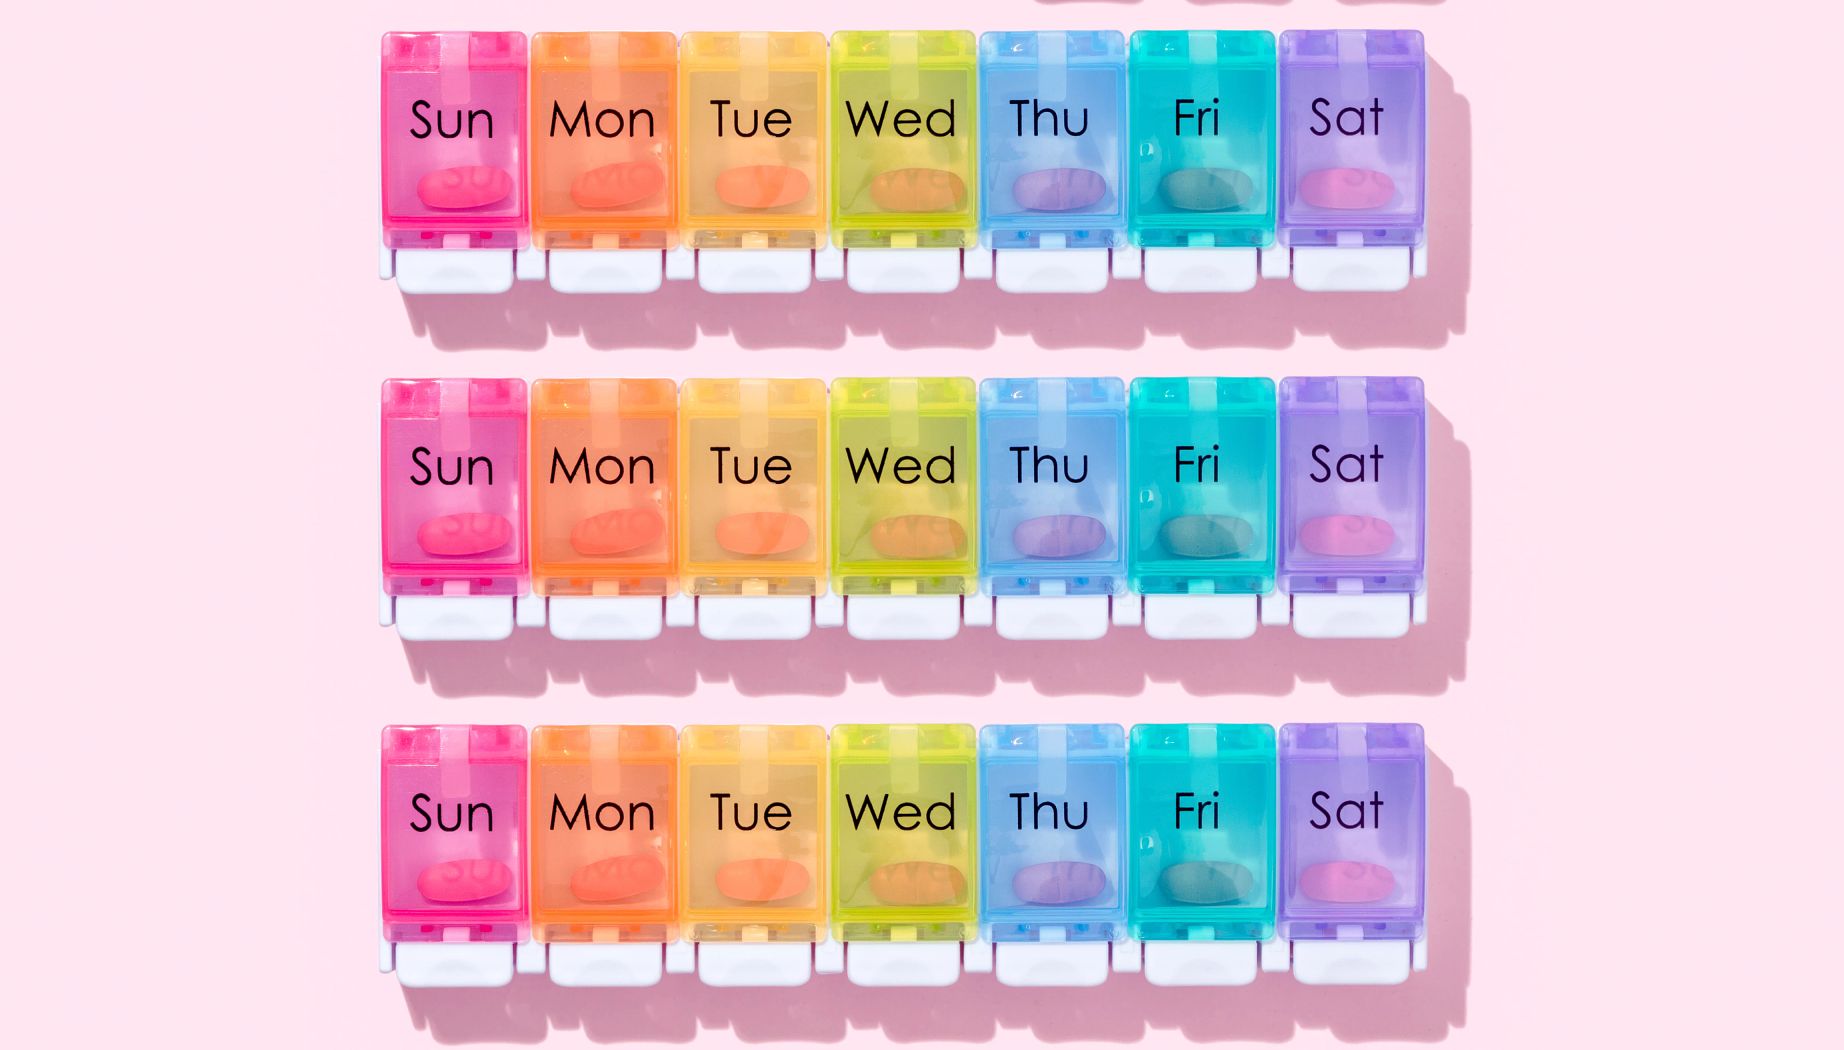 Pill organizer arranged by one calendar month on pink colored background.